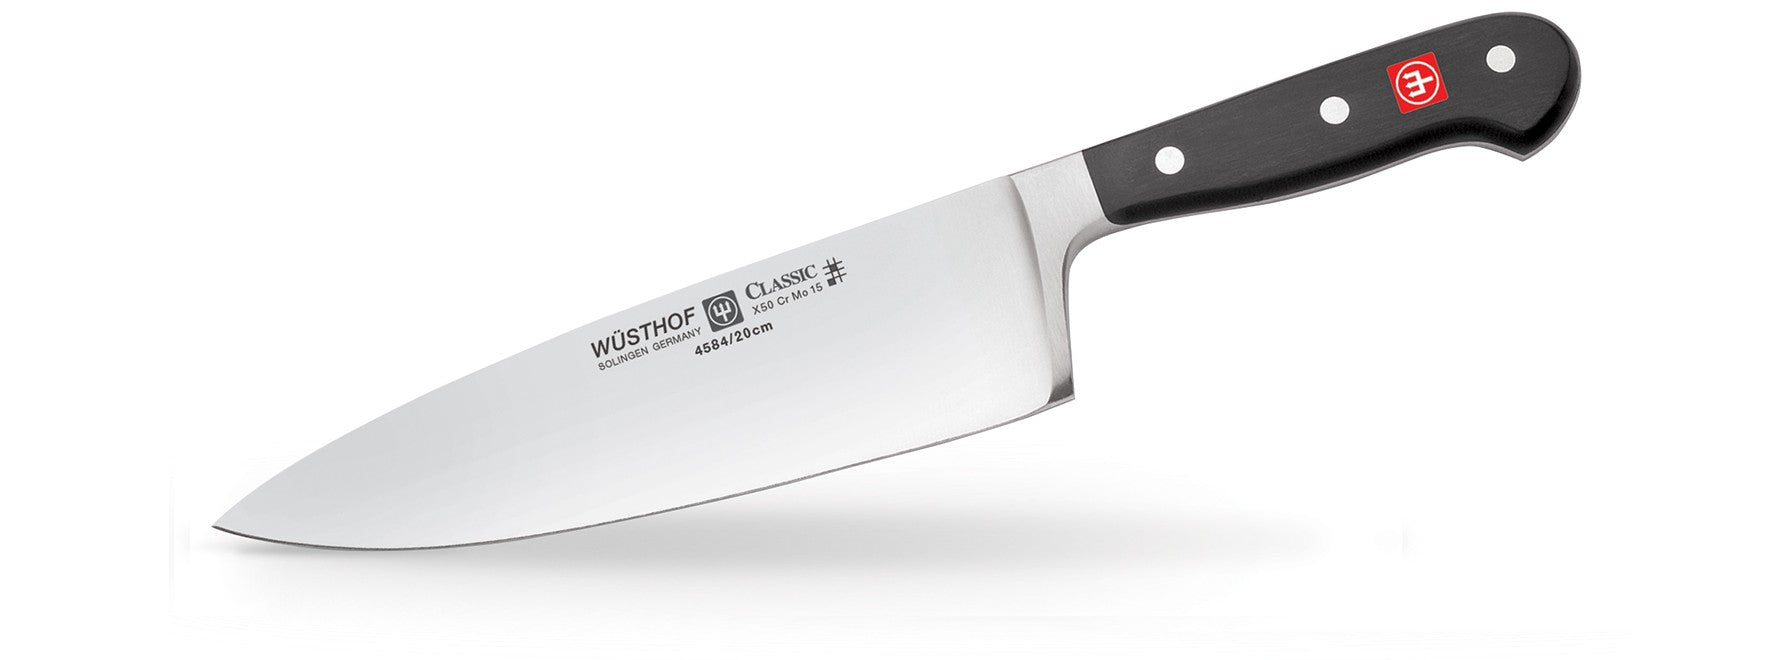 Wusthof Classic 8 Inch Extra Wide Cook’s Knife